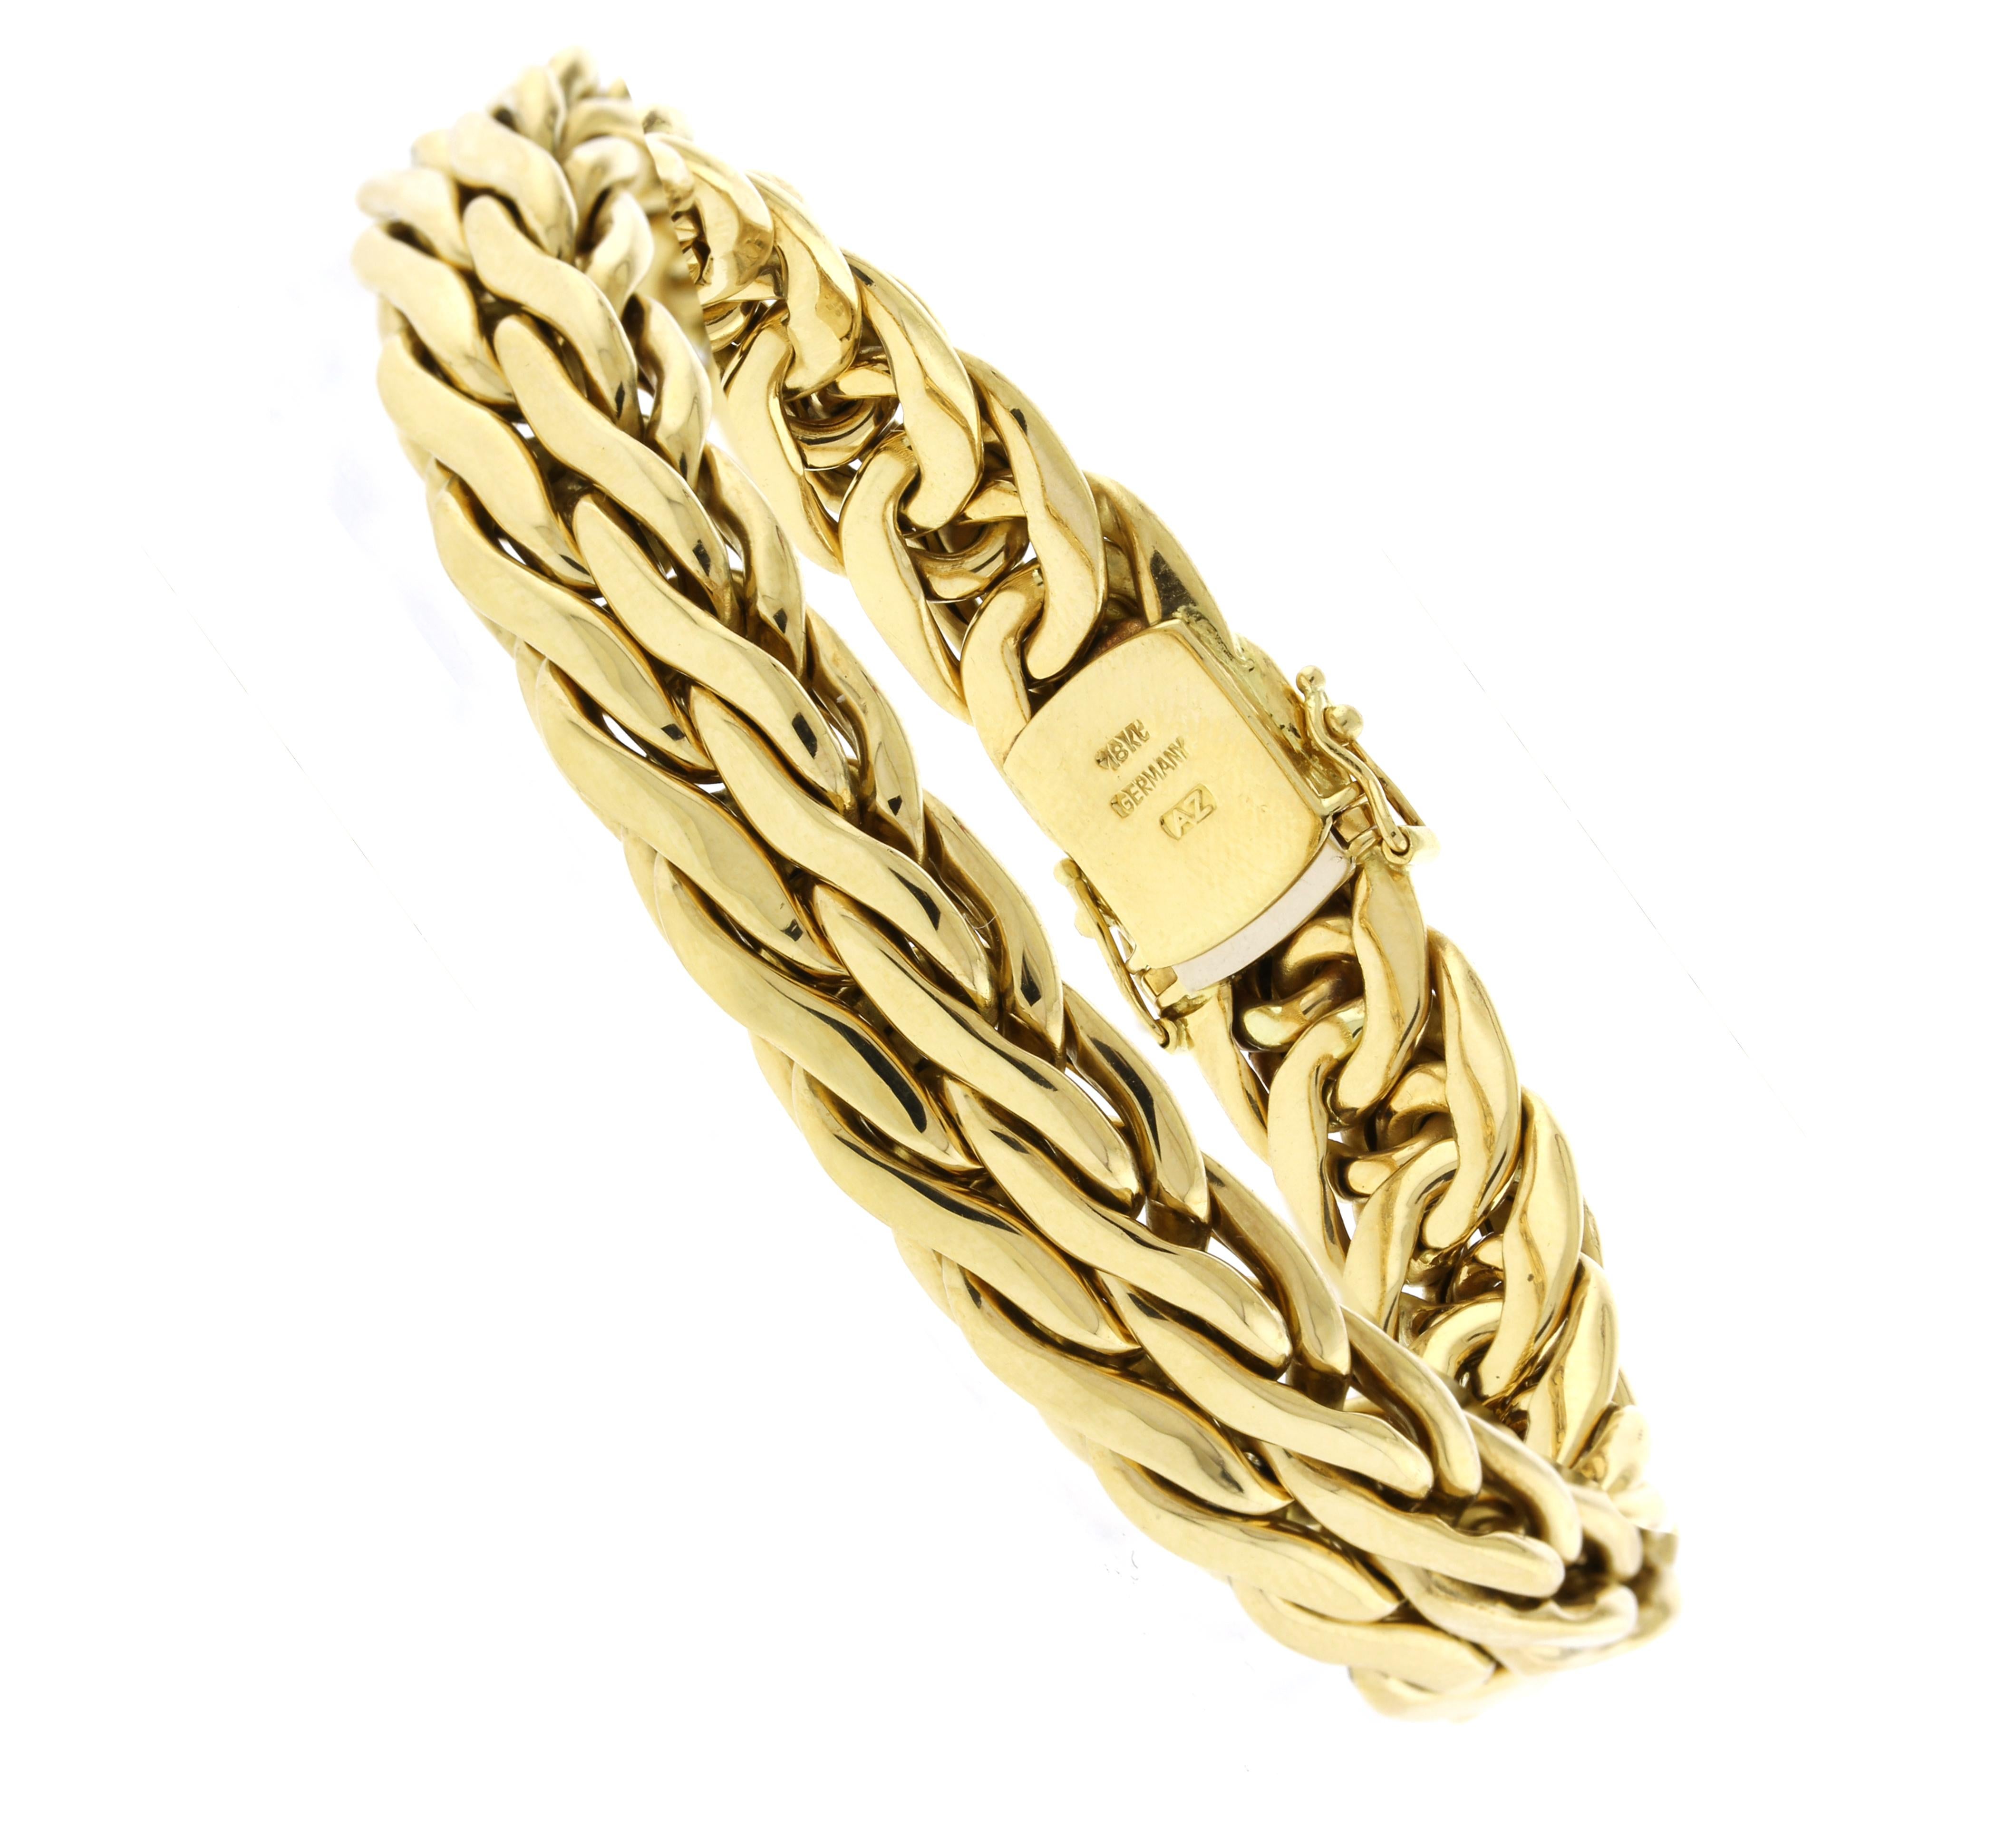 From Abel and Zimmerman, this woven bracelet is great for everyday wear.
♦ Designer: Abel and Zimmerman
♦ Circa: 1980s
♦ Length: 7 1/4 inches
♦ Width: 1/2inch
♦ Metal: 18Yellow Gold
♦ Packaging: Pampillonia Presentation Box
♦ Condition: Excellent,